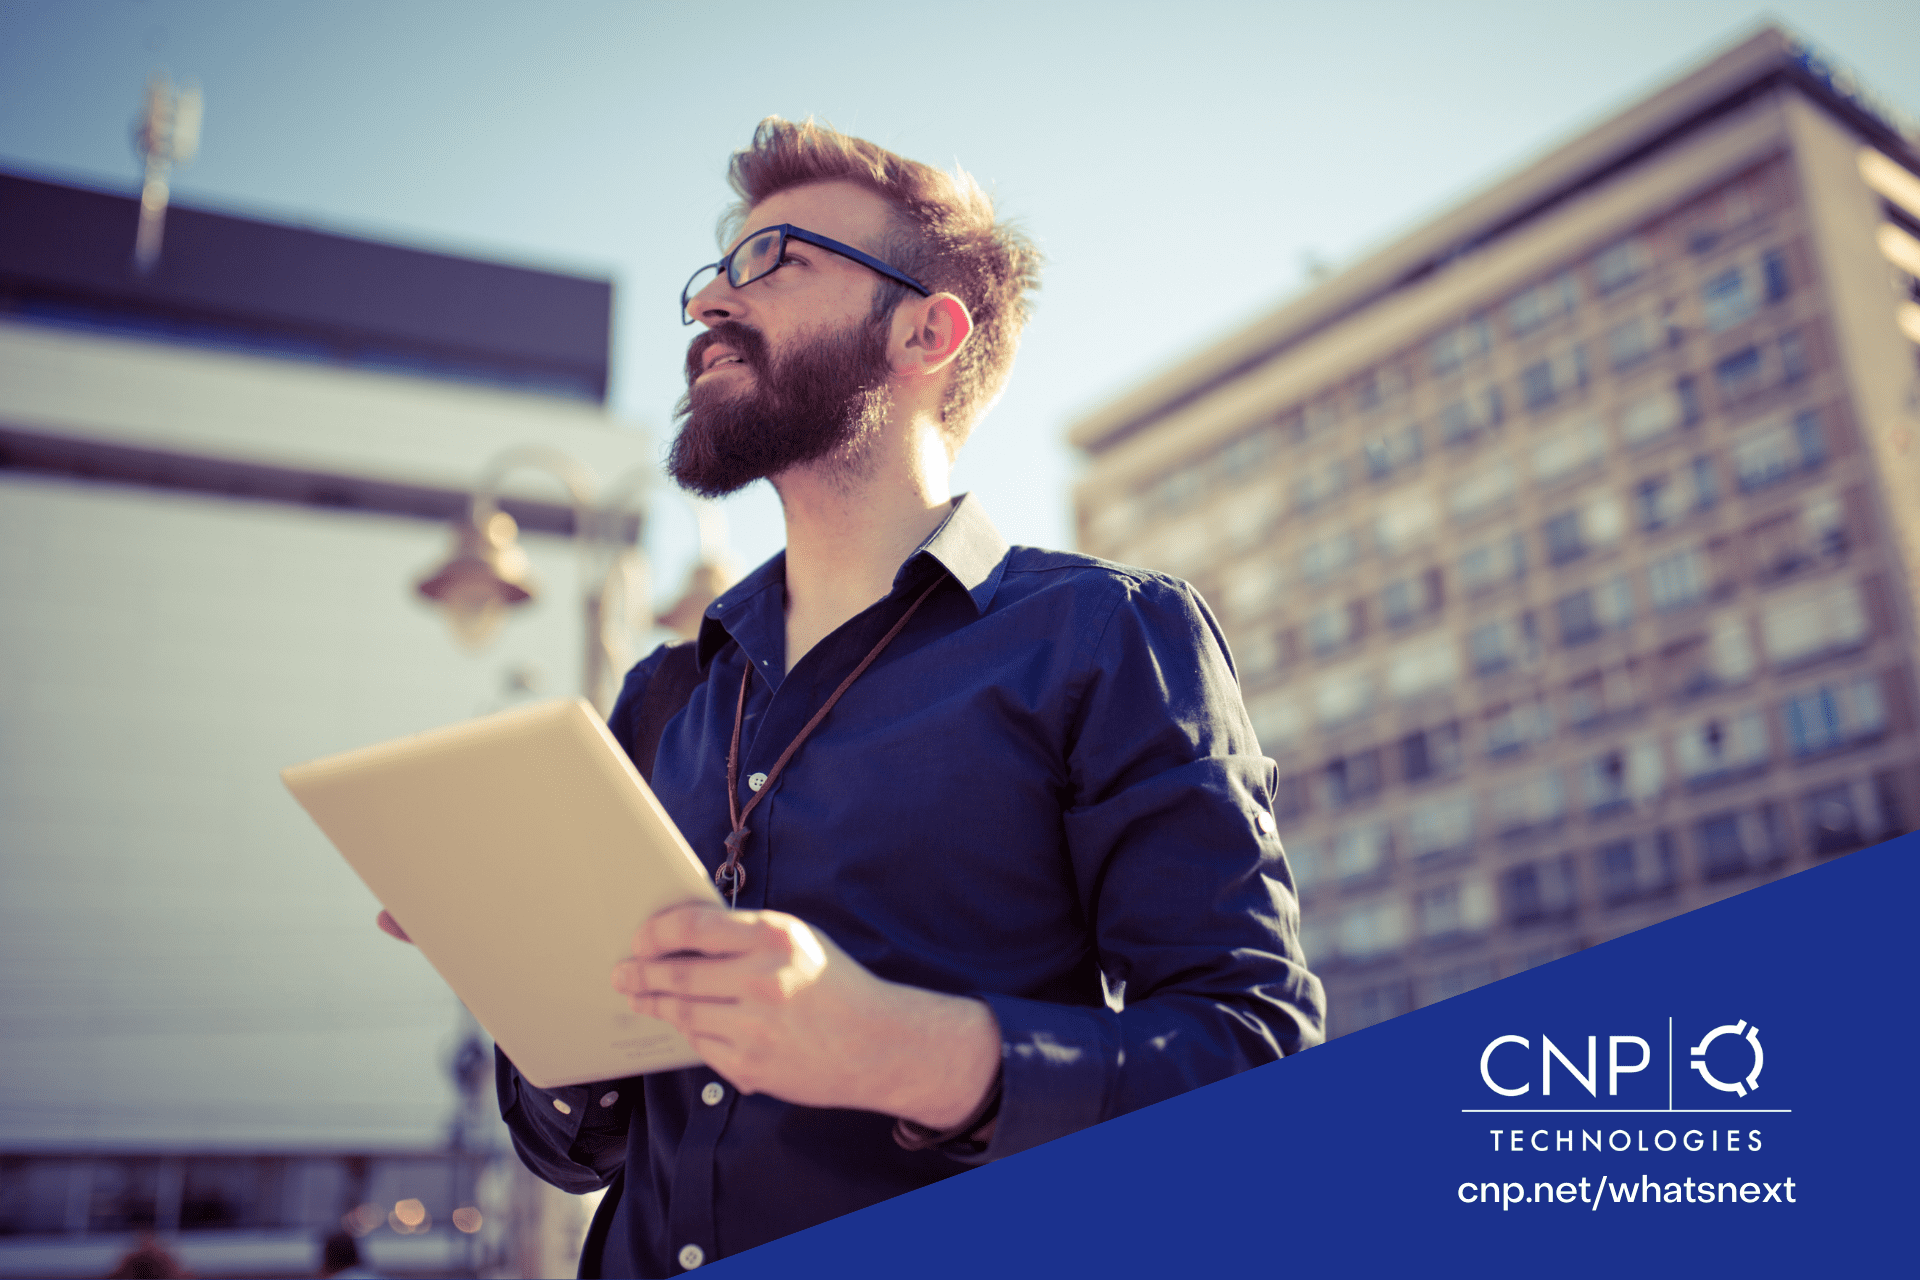 A man is outside looking up toward something while holding a tablet. There are buildings in the background around him. The CNP Technologies logo is in the bottom right corner